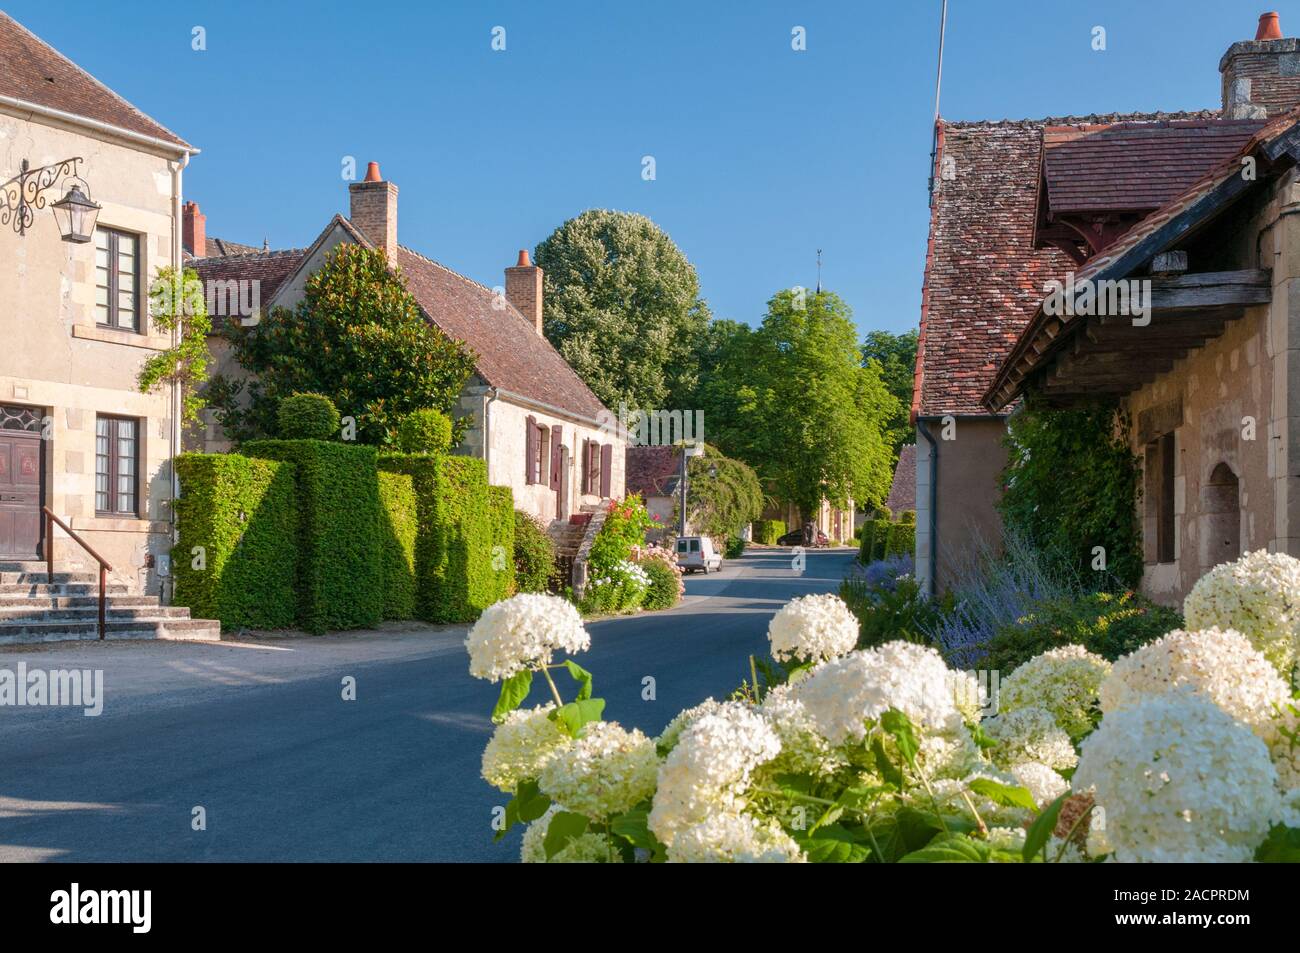 Medieval village of Apremont-sur-Allier, listed as one of the most beautiful medieval villages in France, Cher (18), France Stock Photo